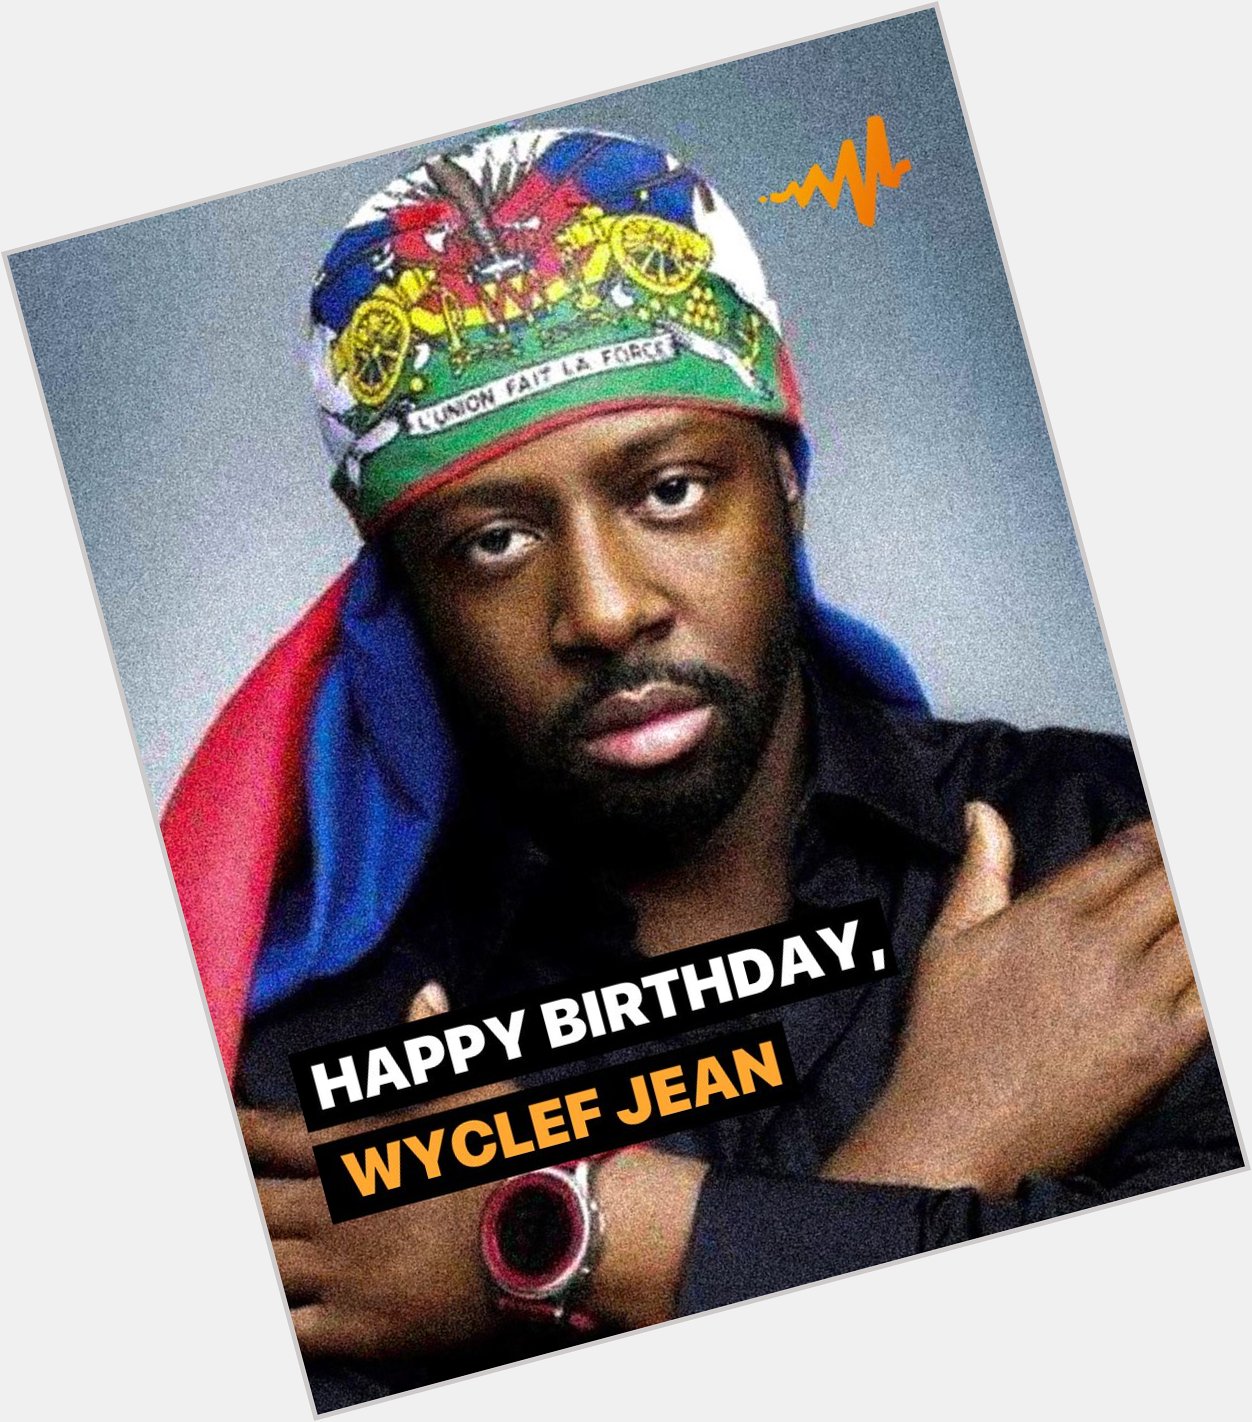 Happy birthday to the Wyclef Jean, a living musical icon.
Which Wyclef track is your favorite?   